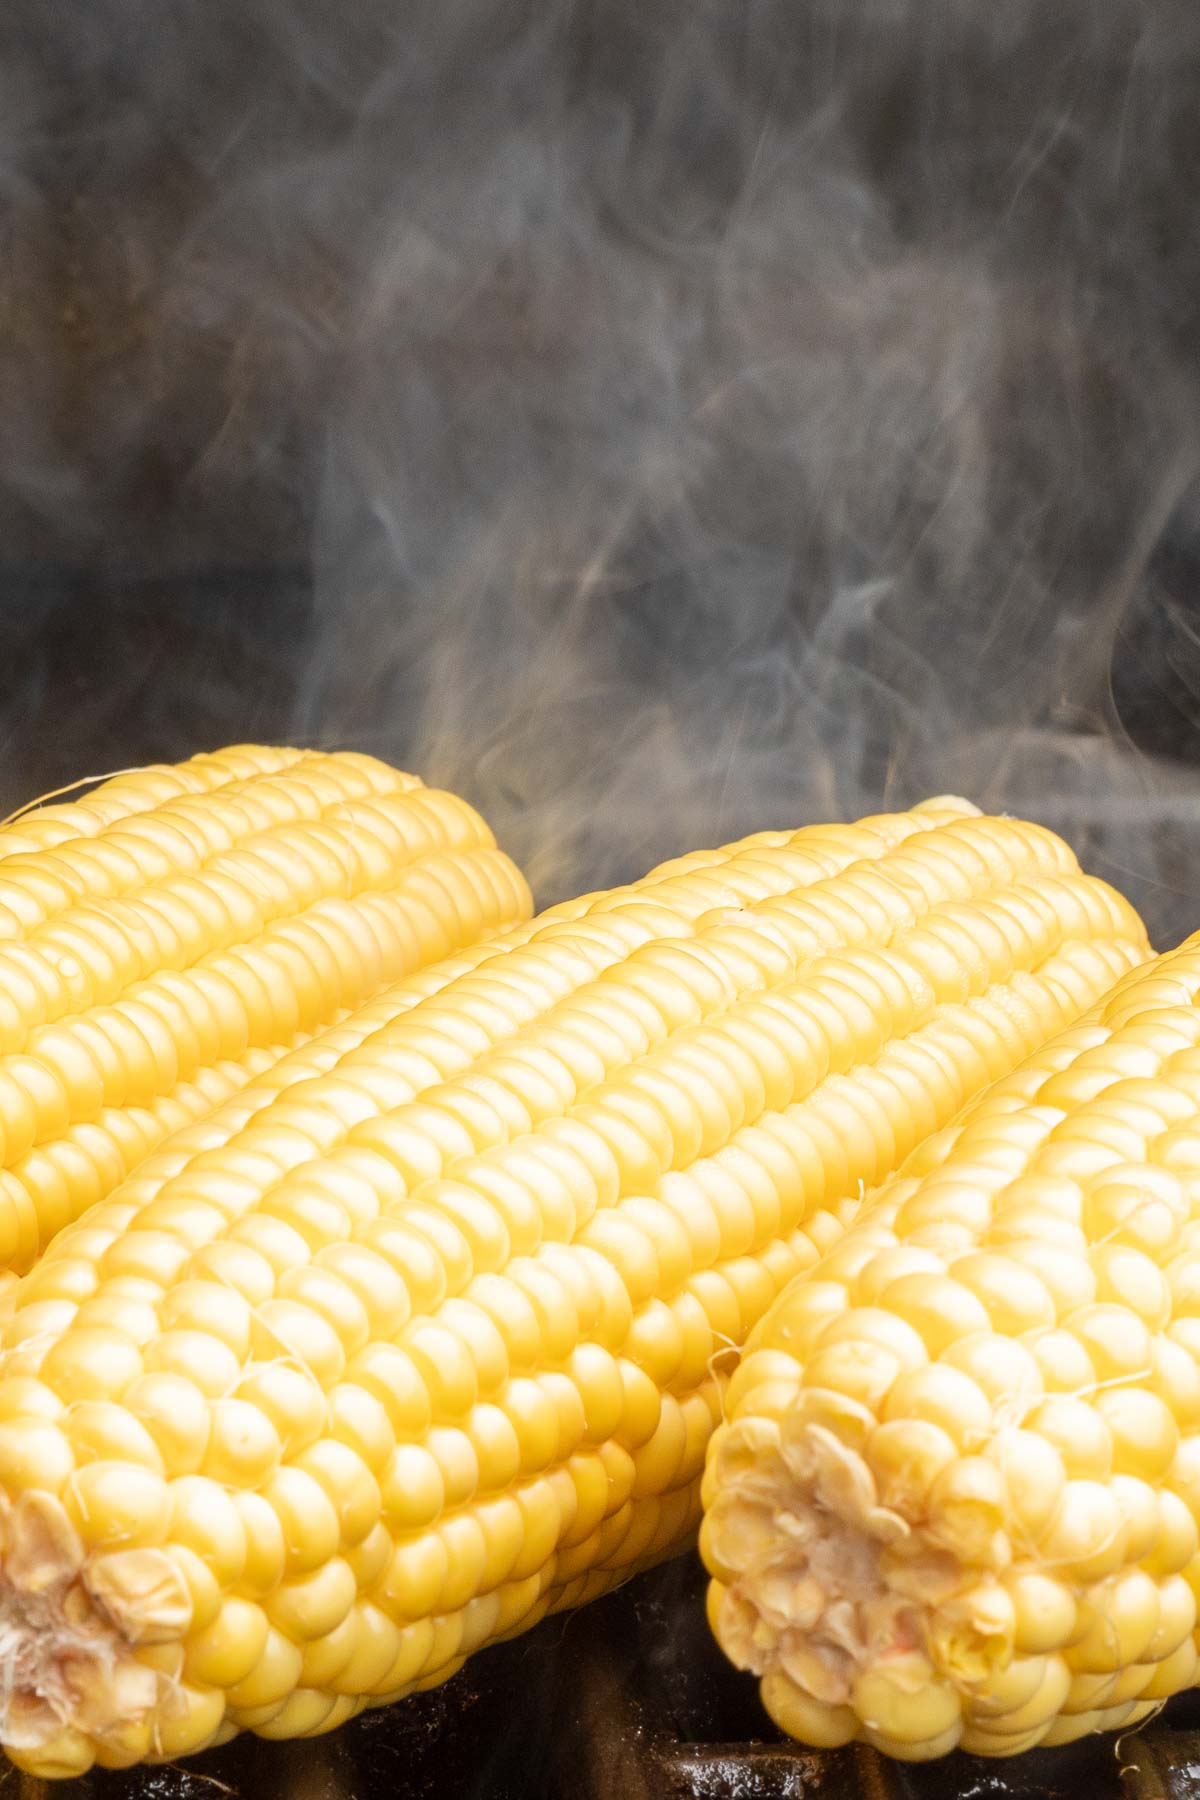 Three ears of grilled corn on the cob with steam rising in the background.